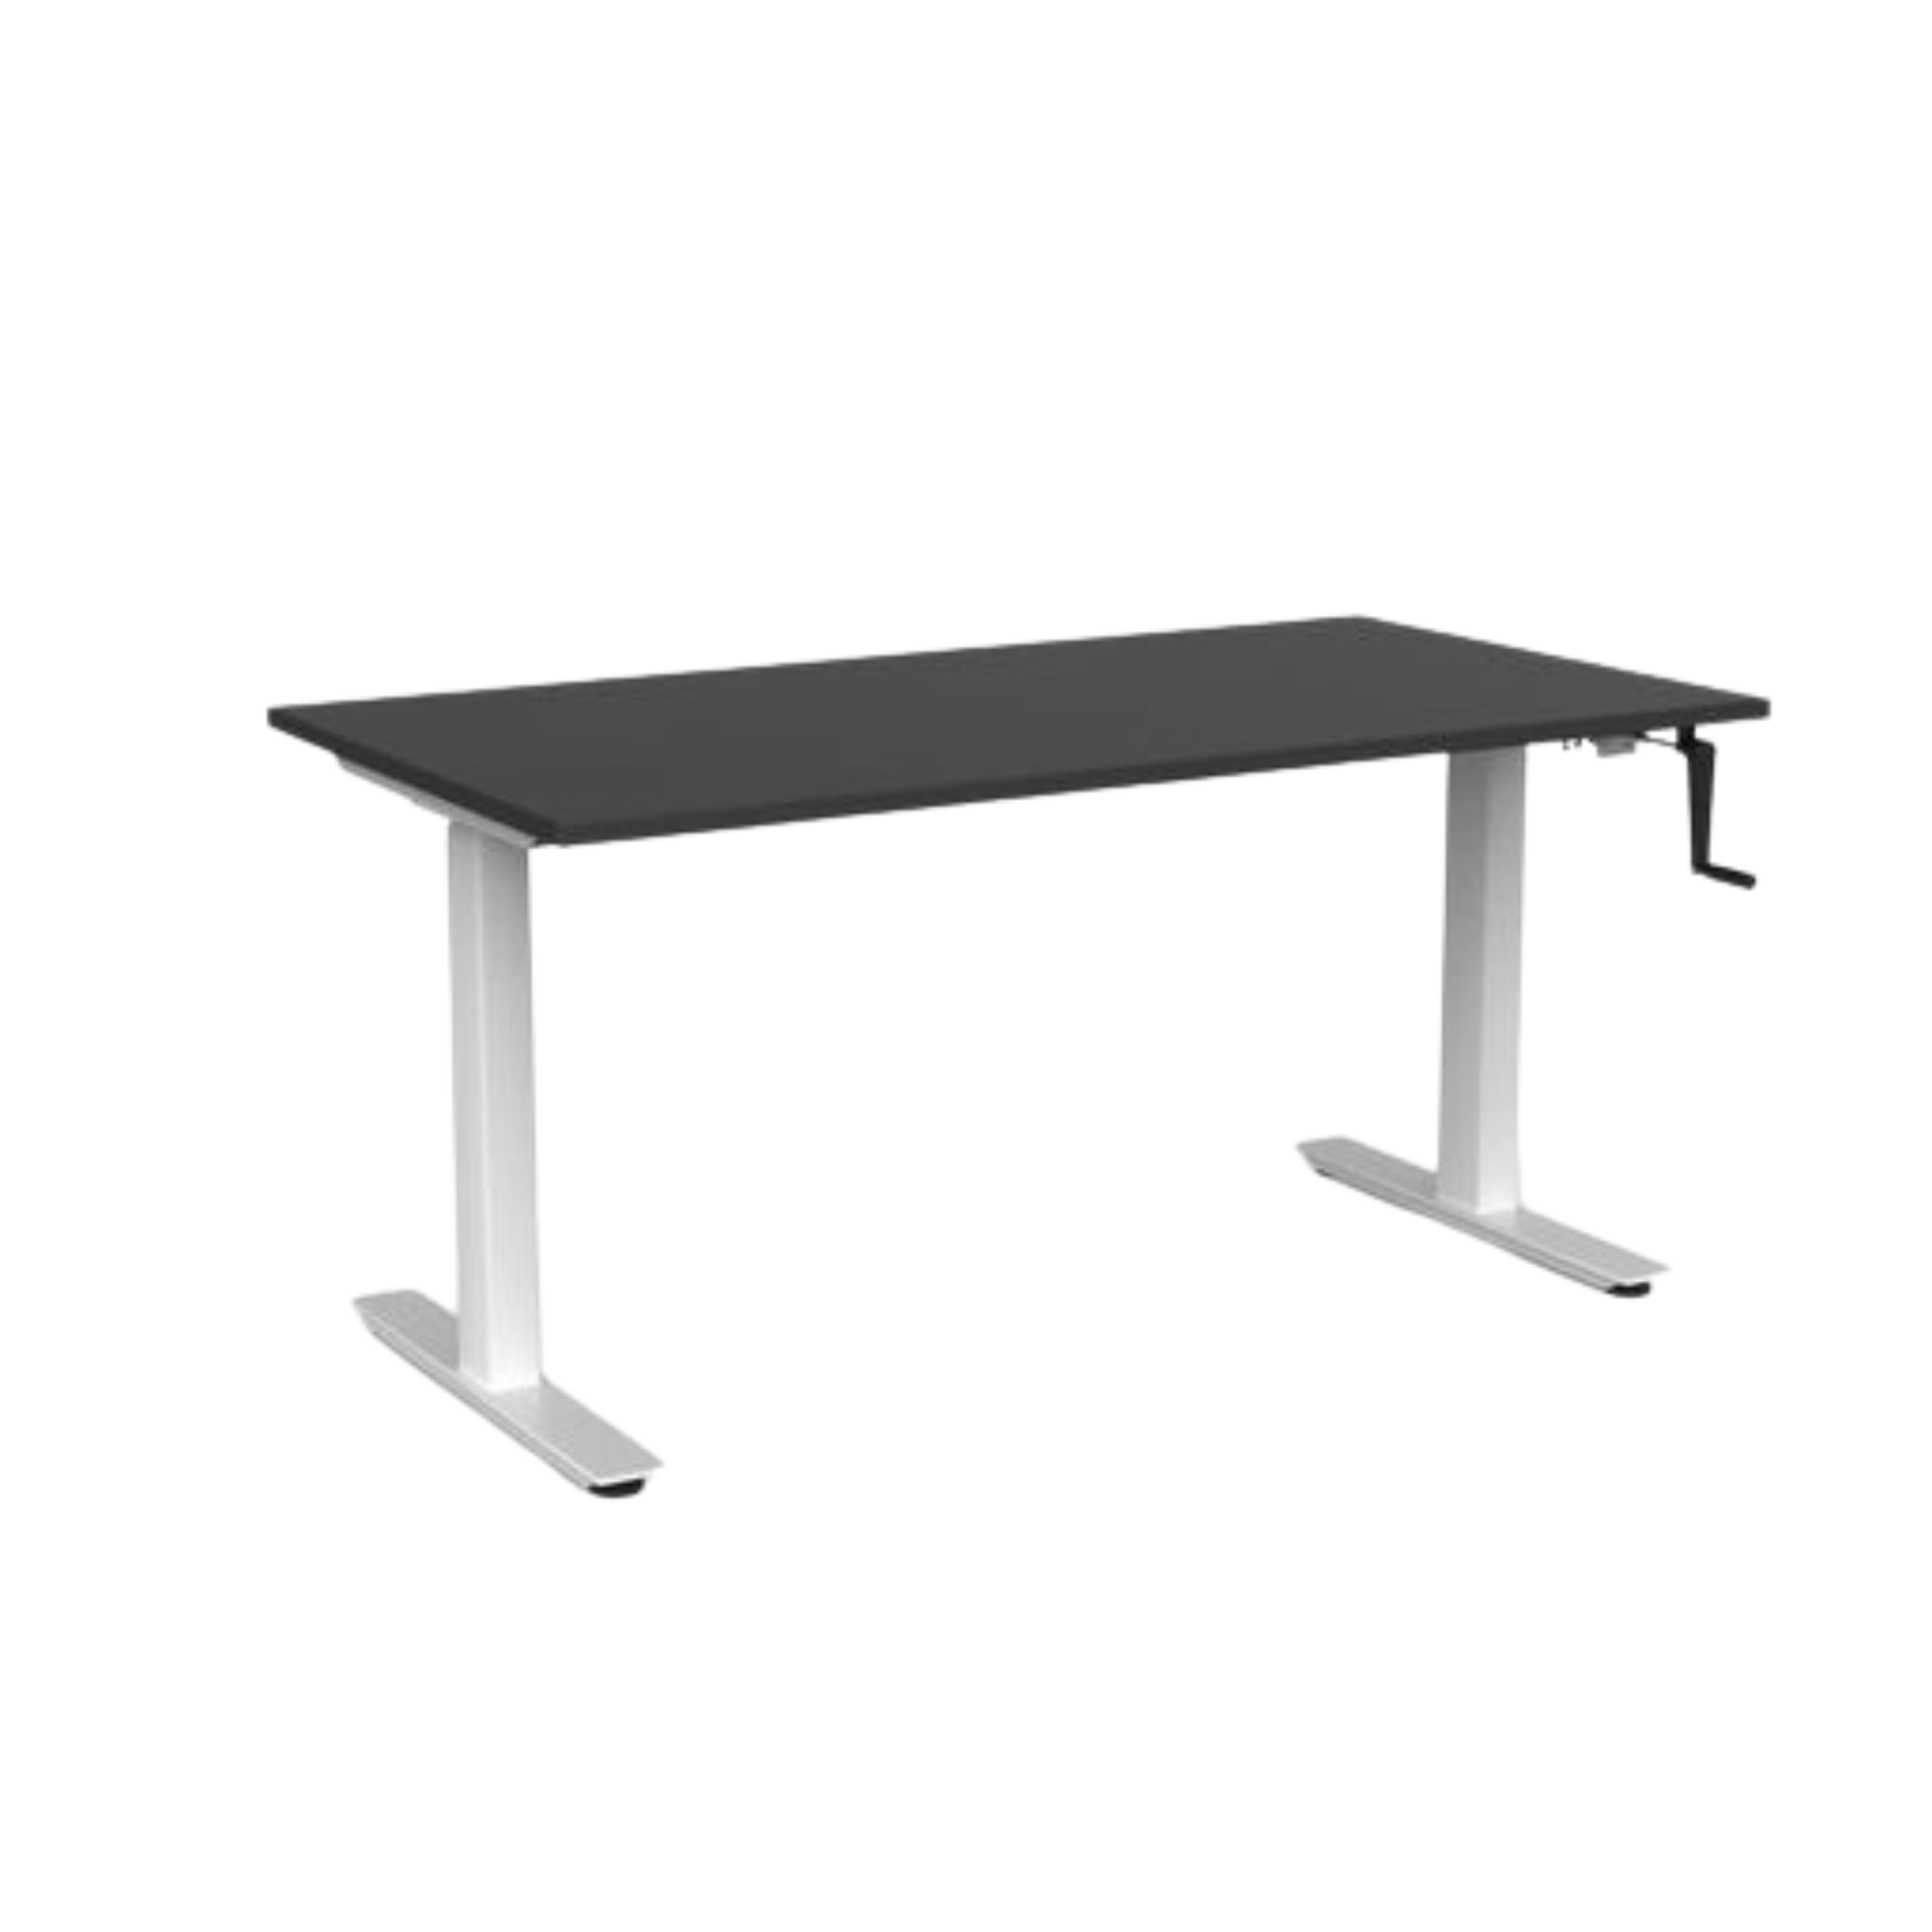 Agile winder sit to stand desk with white frame and black top